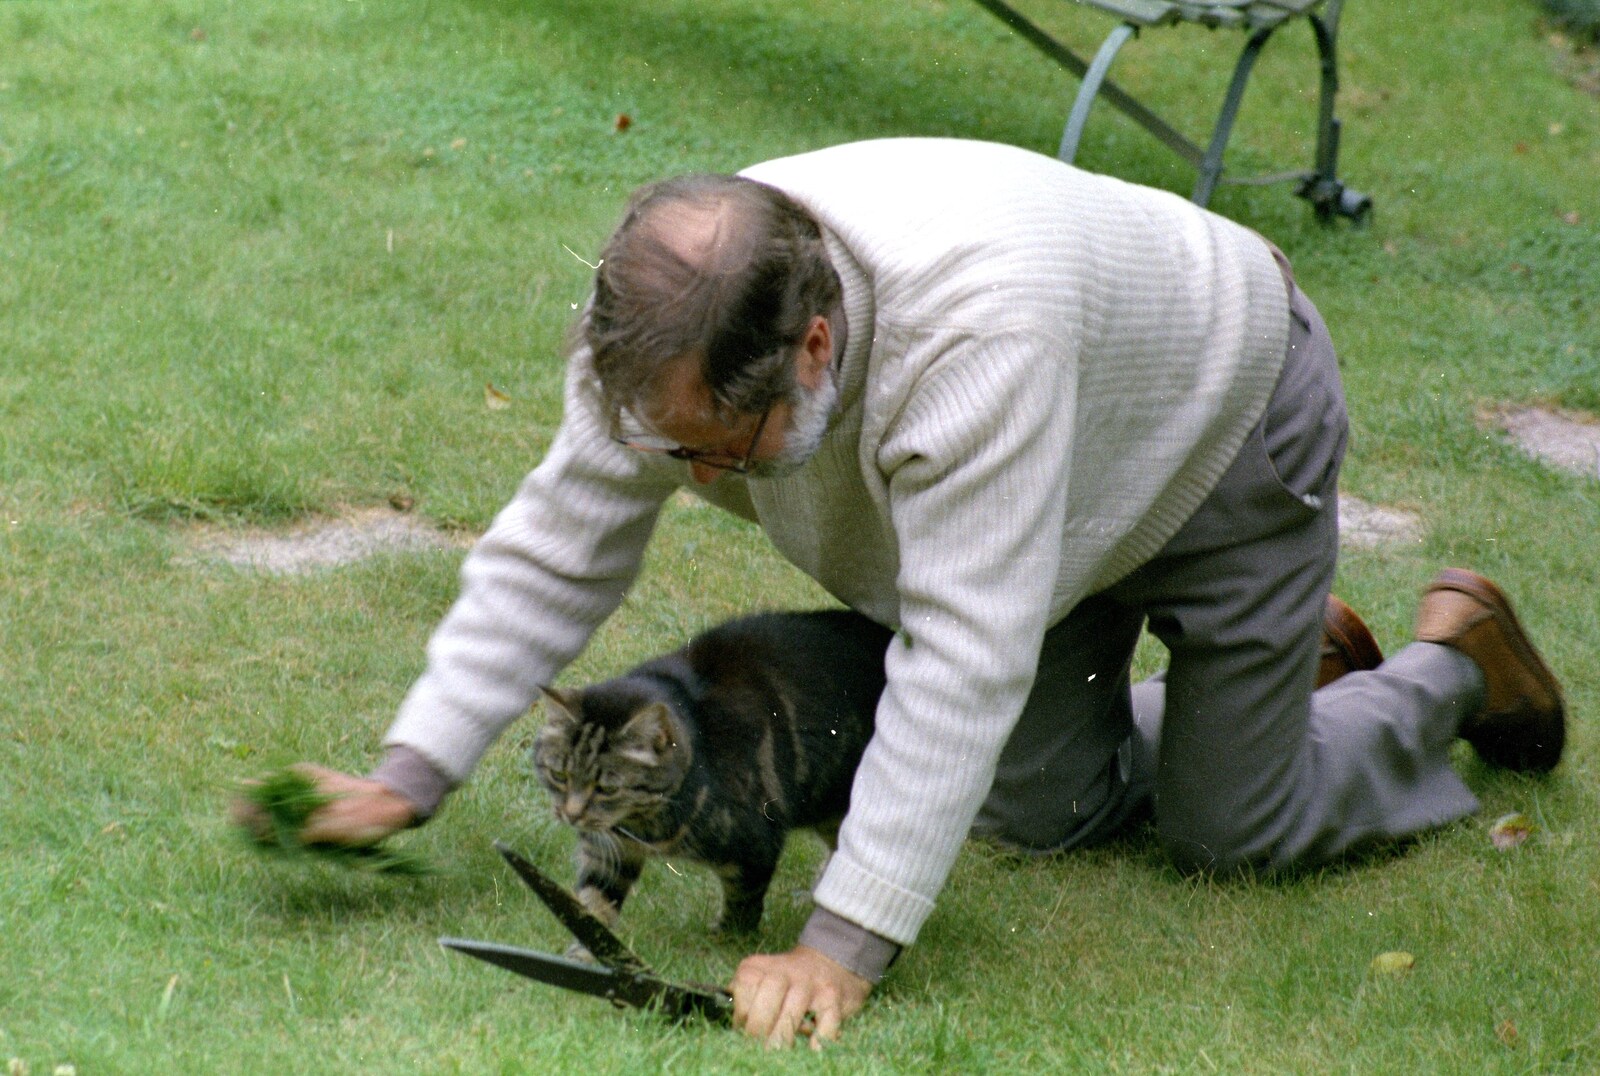 Andy follows Fleabag around the lawn from A Ford Cottage Miscellany, Barton on Sea, Hampshire - 7th July 1986